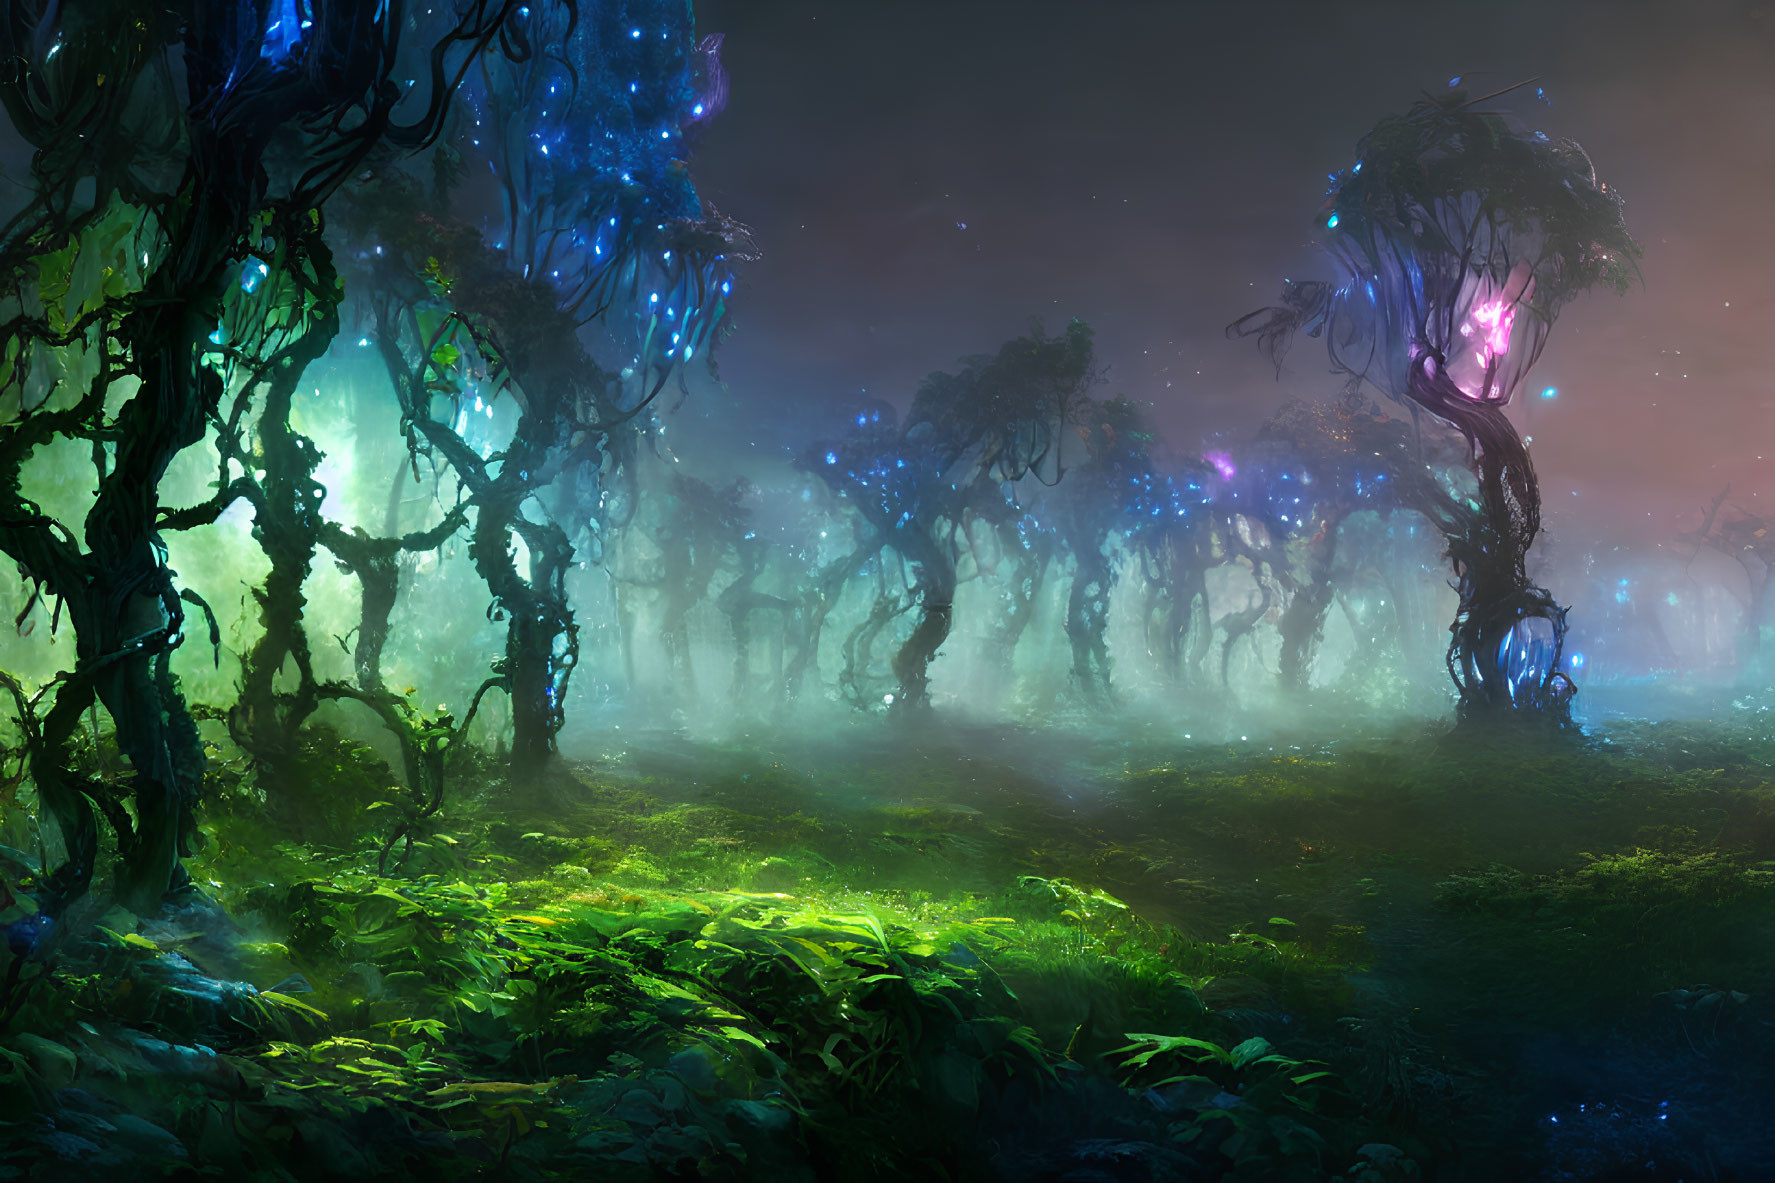 Fantasy forest with glowing blue and purple flora under ethereal light